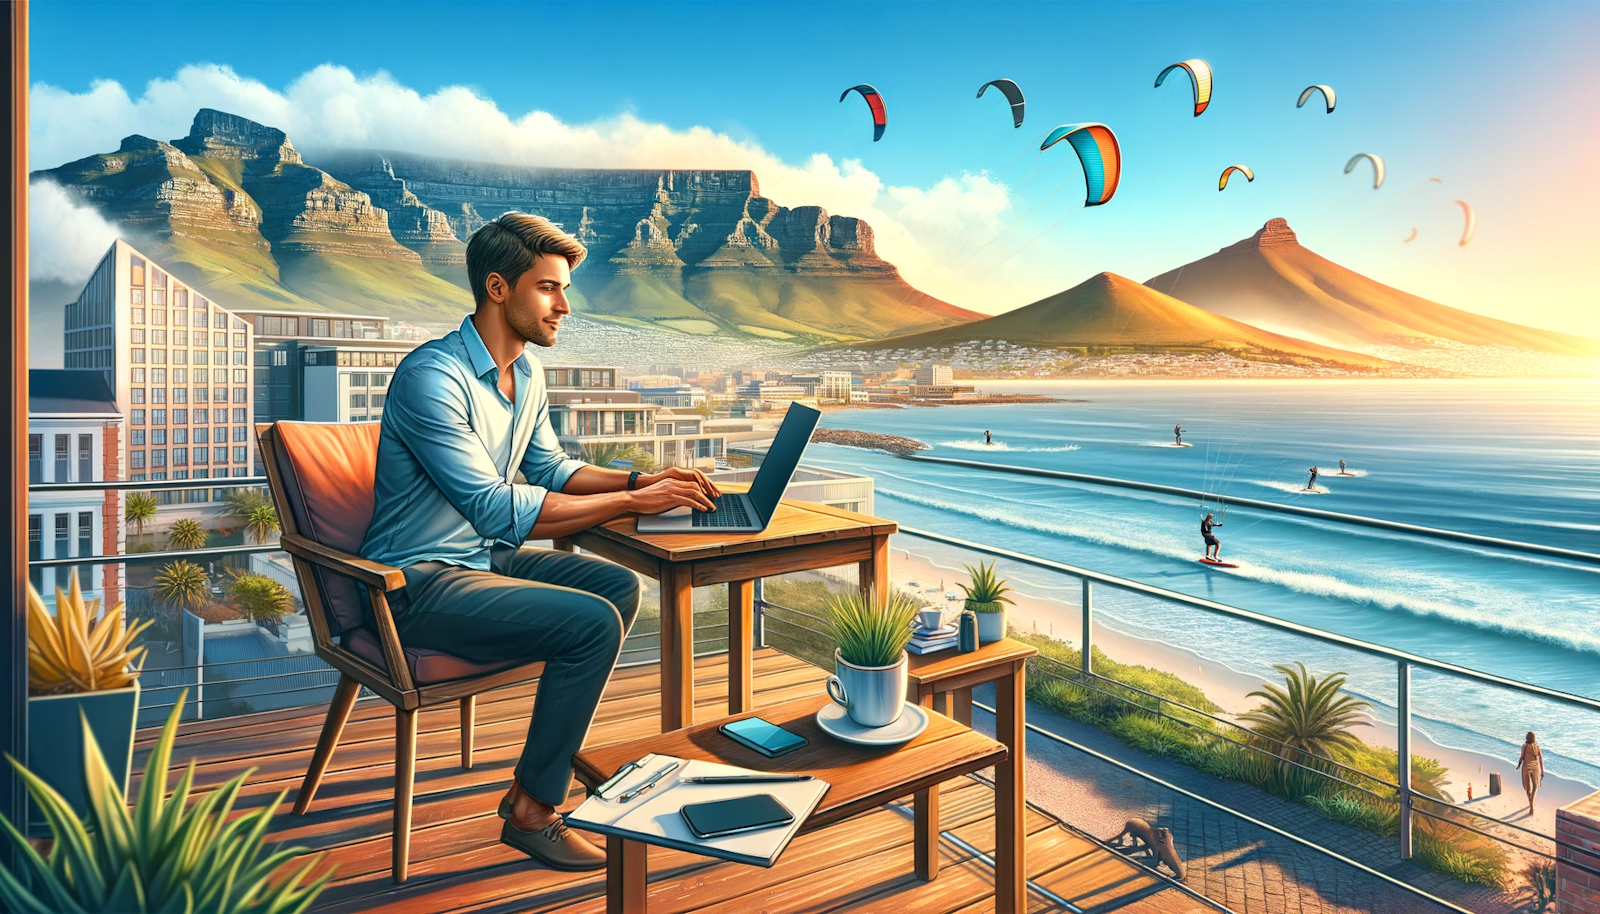 A digital nomad working on a laptop in Cape Town with Table Mountain in the background, highlighting a perfect blend of work and leisure with a sunny atmosphere, beachside café setting, and kitesurfers in the distance.